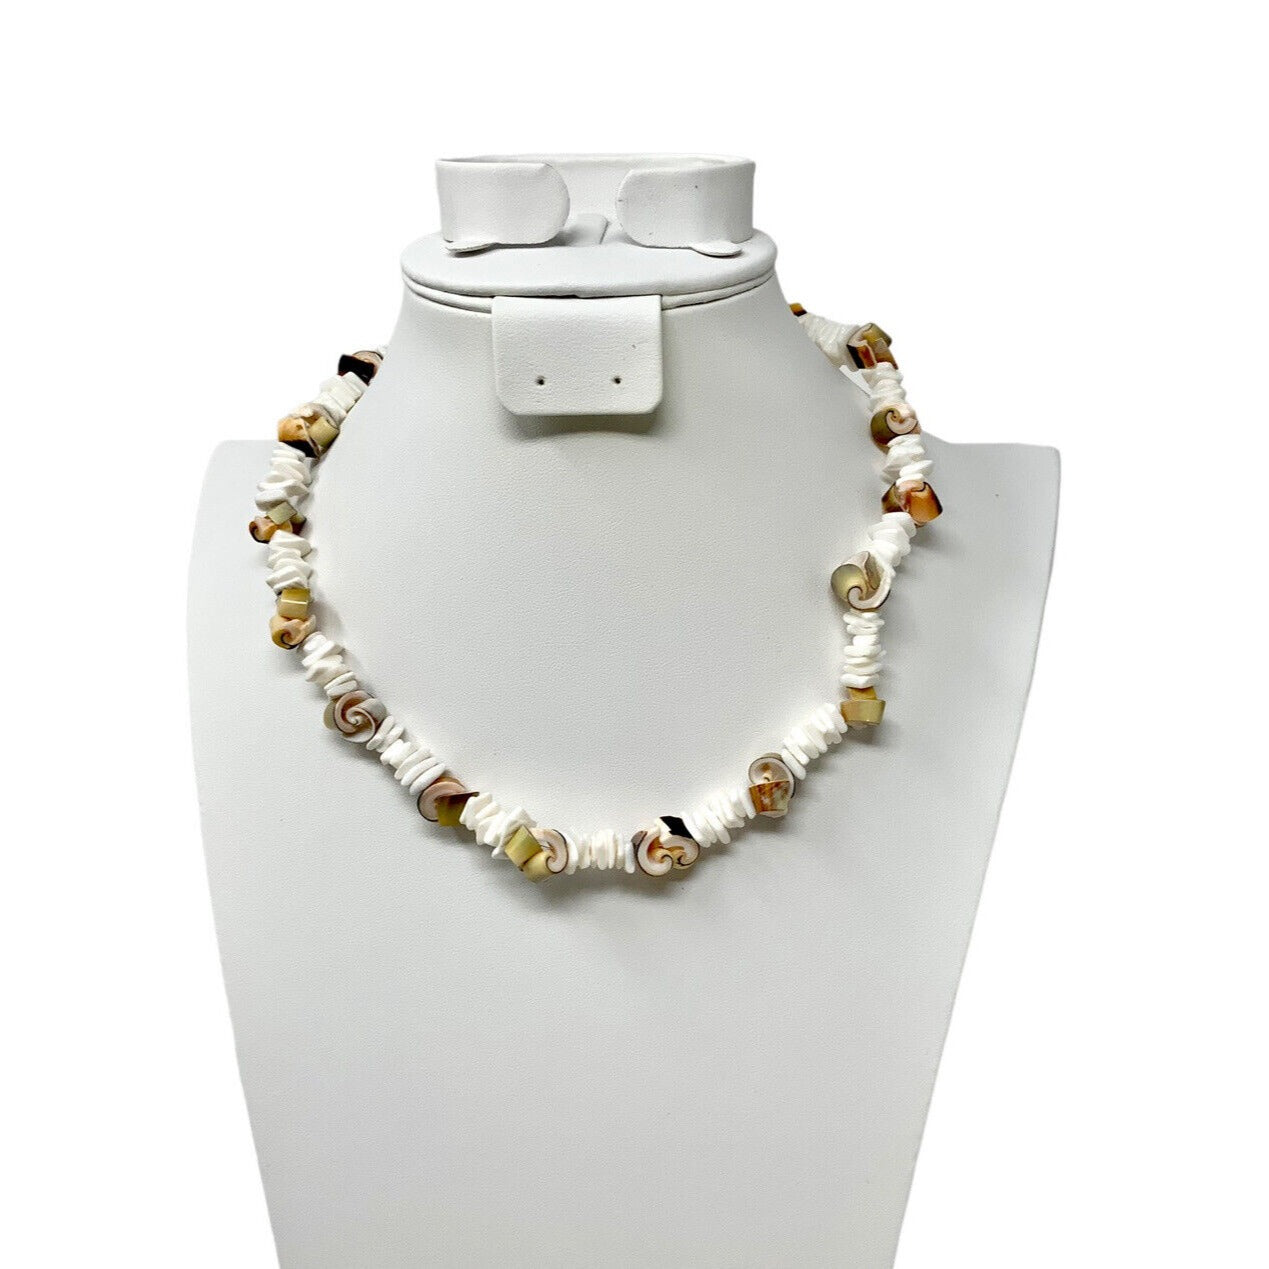 Brown and Egg-Shell Colored Shell Necklace Displayed on a Bust on a White Background